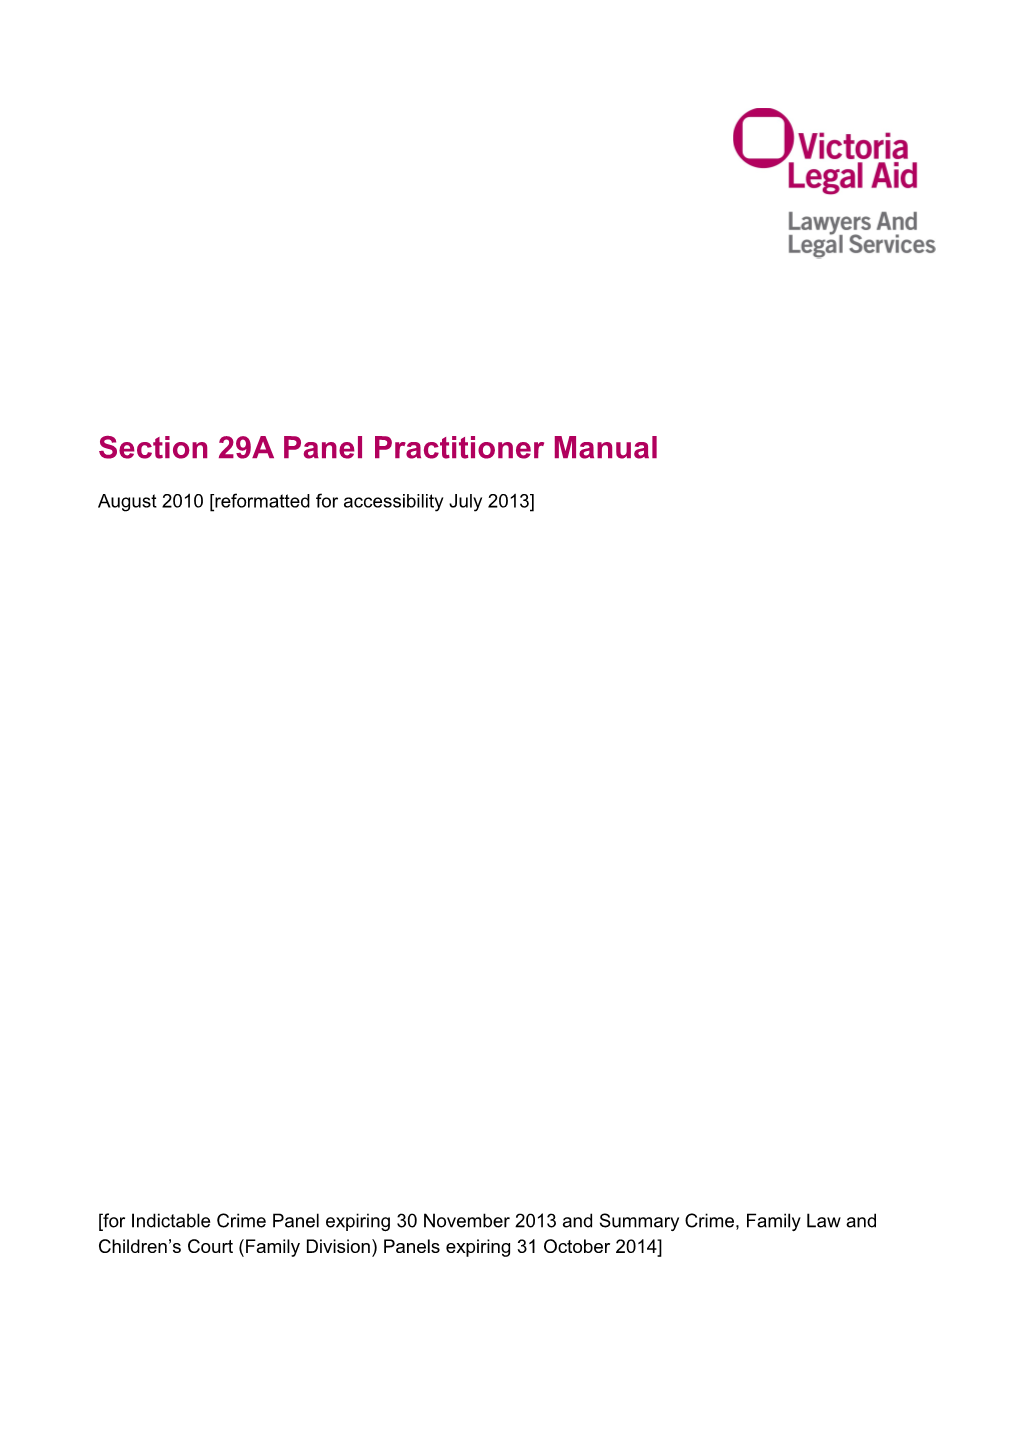 Section 29A Panel Practitioner Manual August 2009 Word Accessible Version